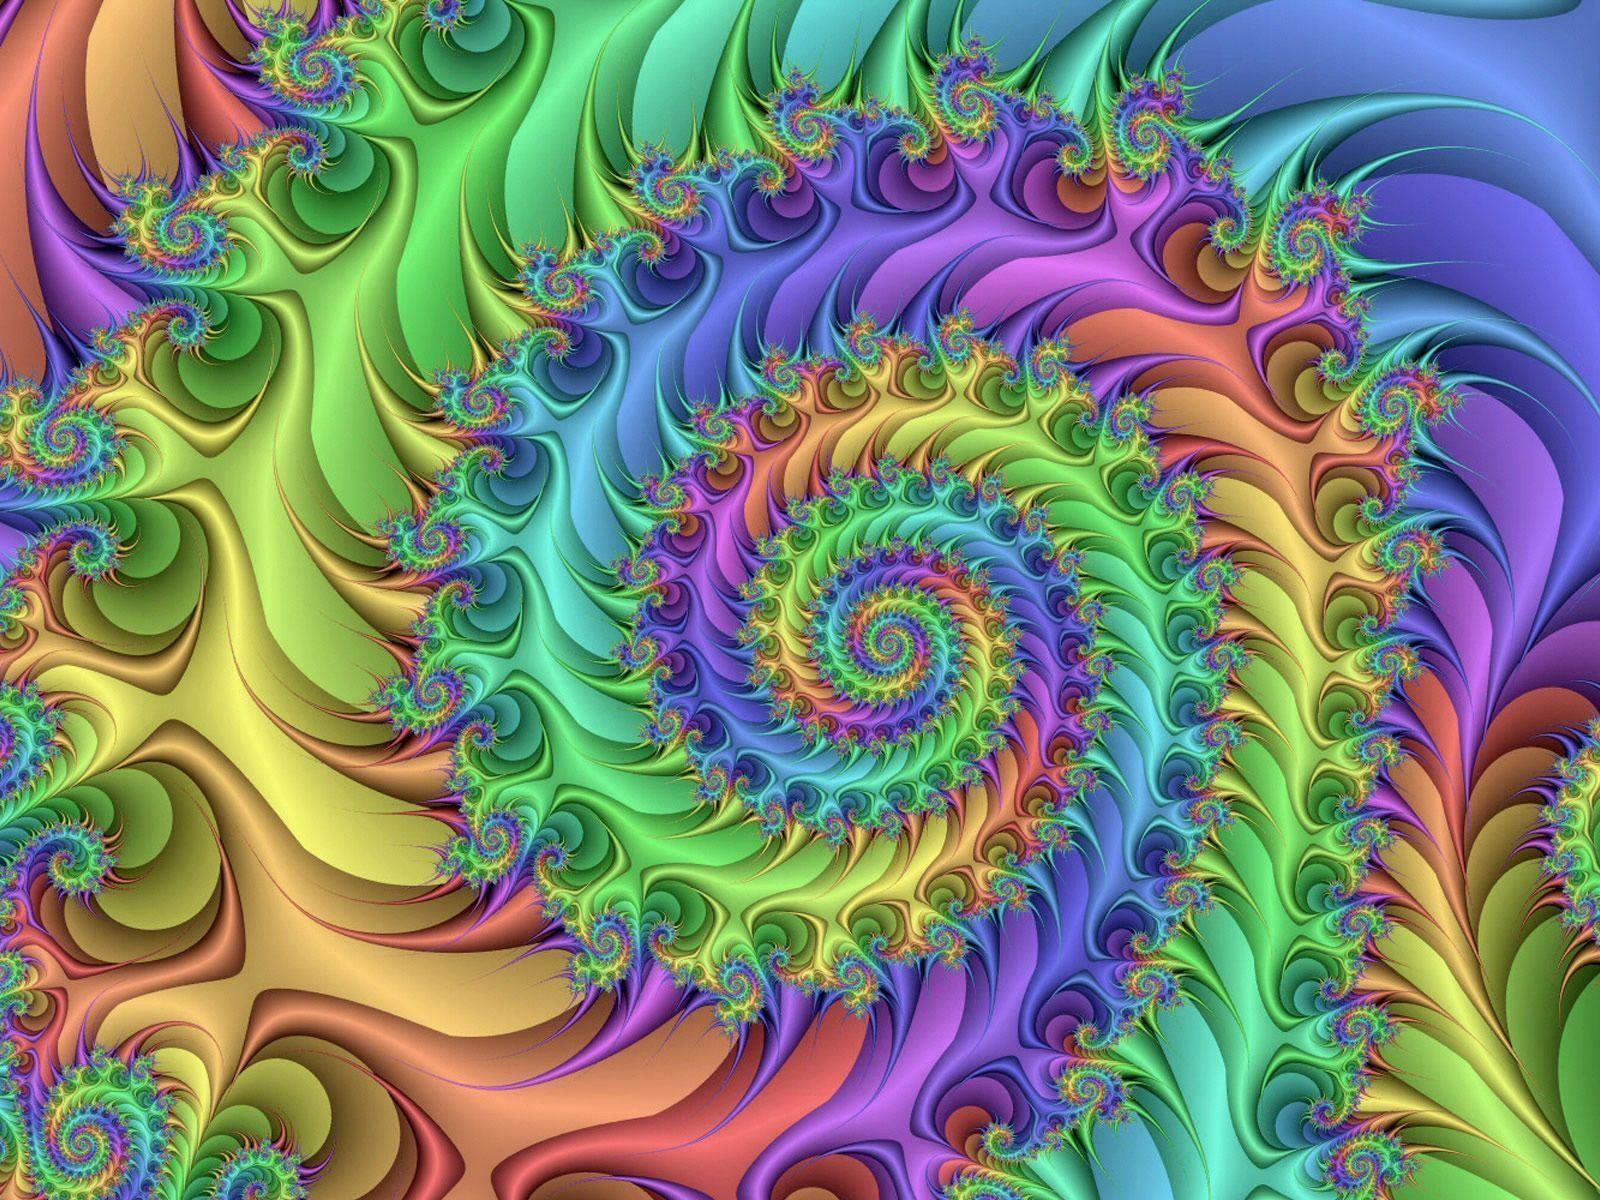 Trippy Wallpaper Moving. coolstyle wallpaper